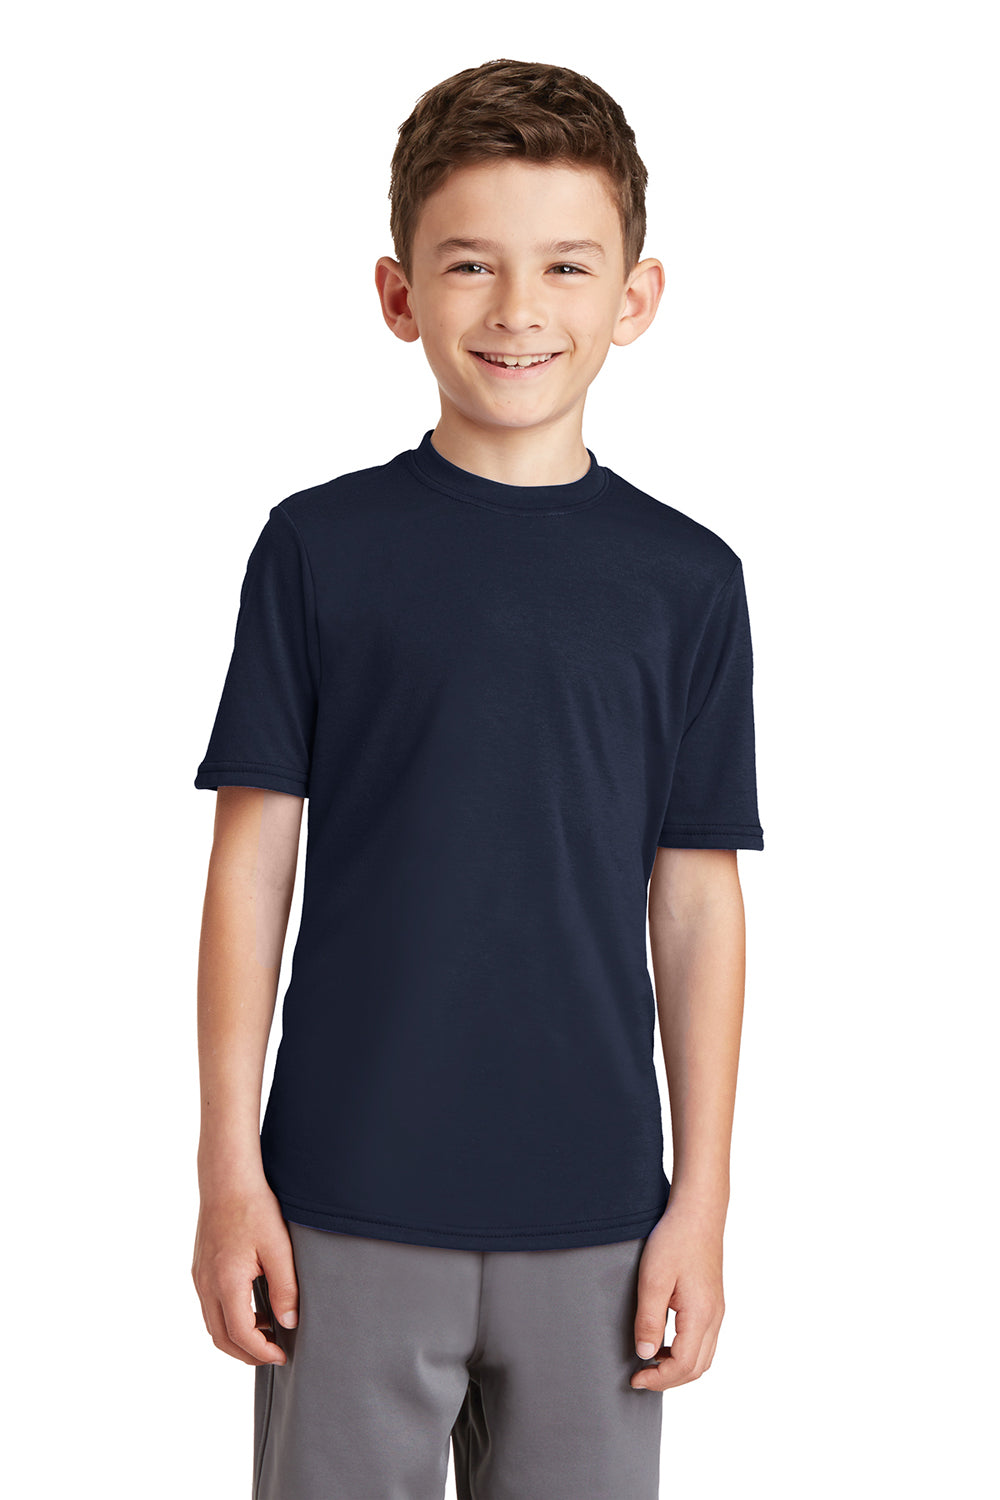 Port & Company PC381Y Youth Dry Zone Performance Moisture Wicking Short Sleeve Crewneck T-Shirt Navy Blue Front